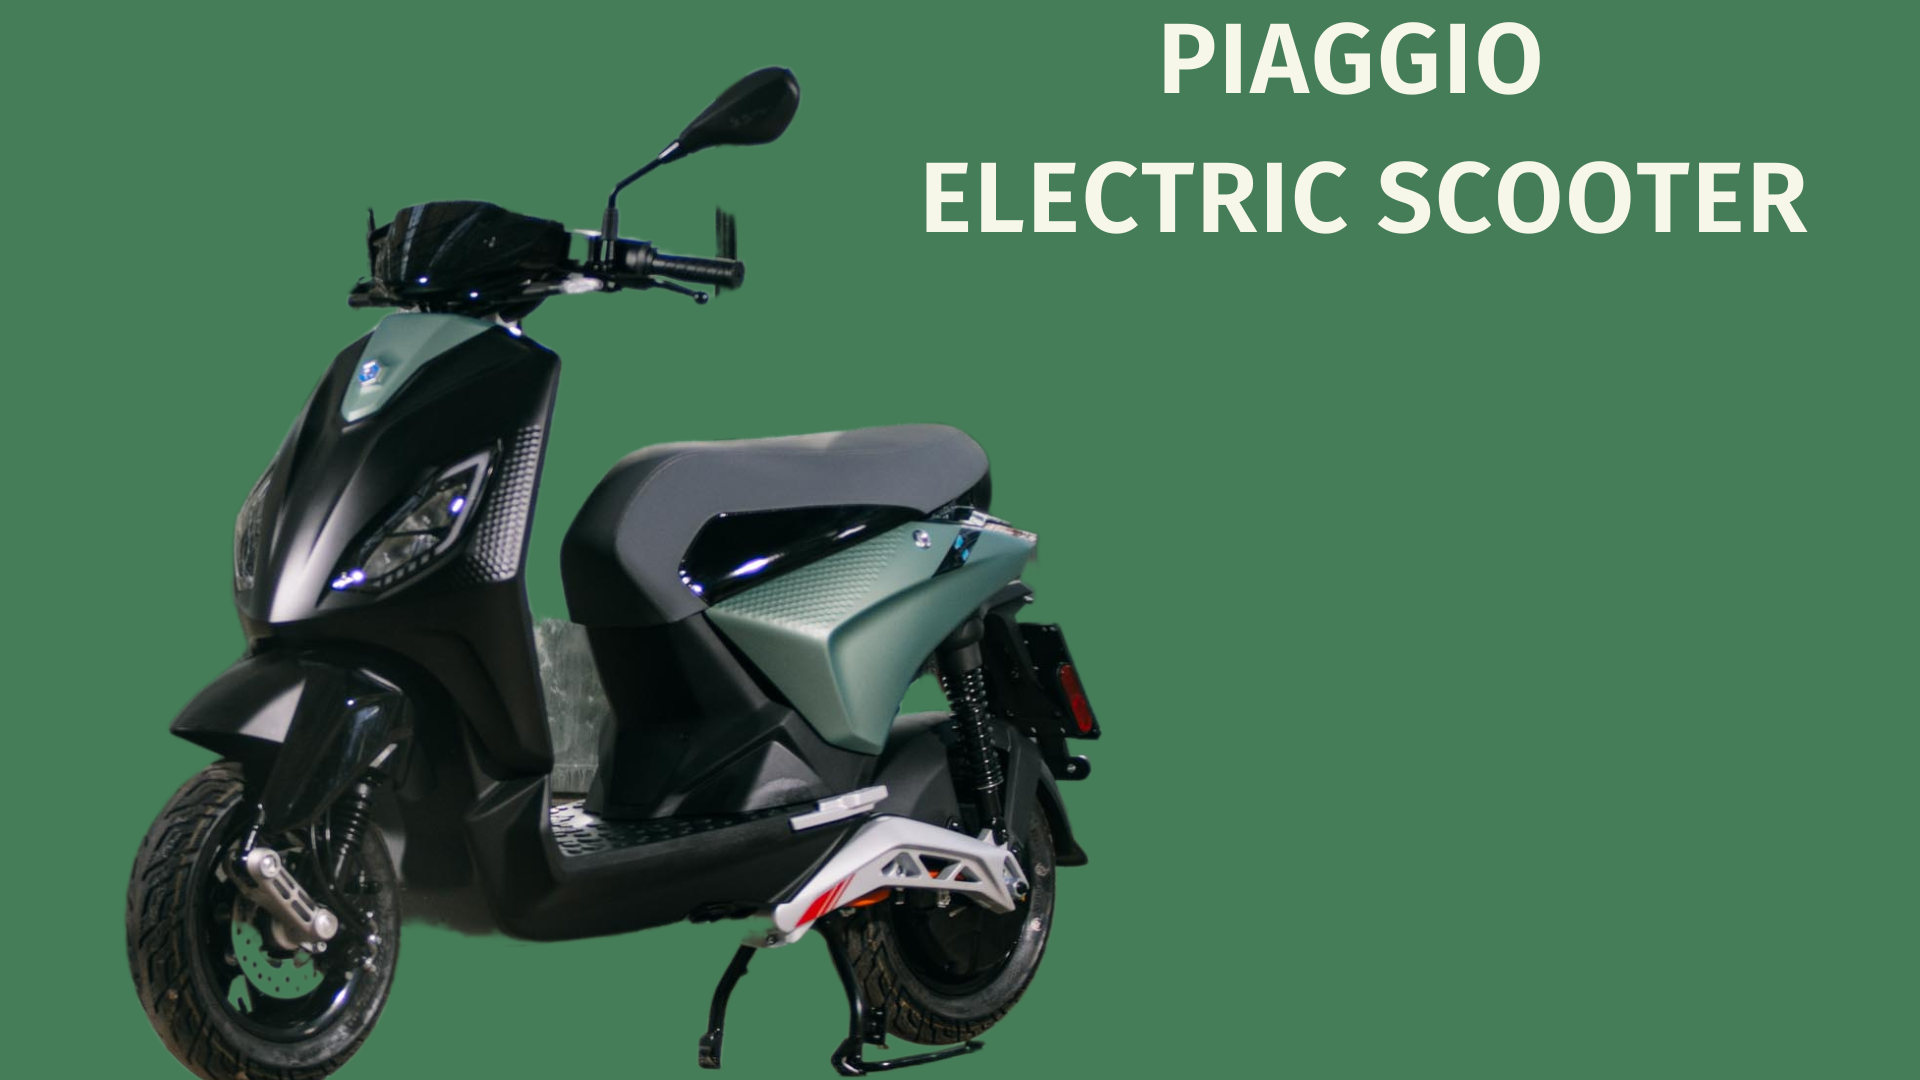 Piaggio Electric Scooter Price, Range, and Specification